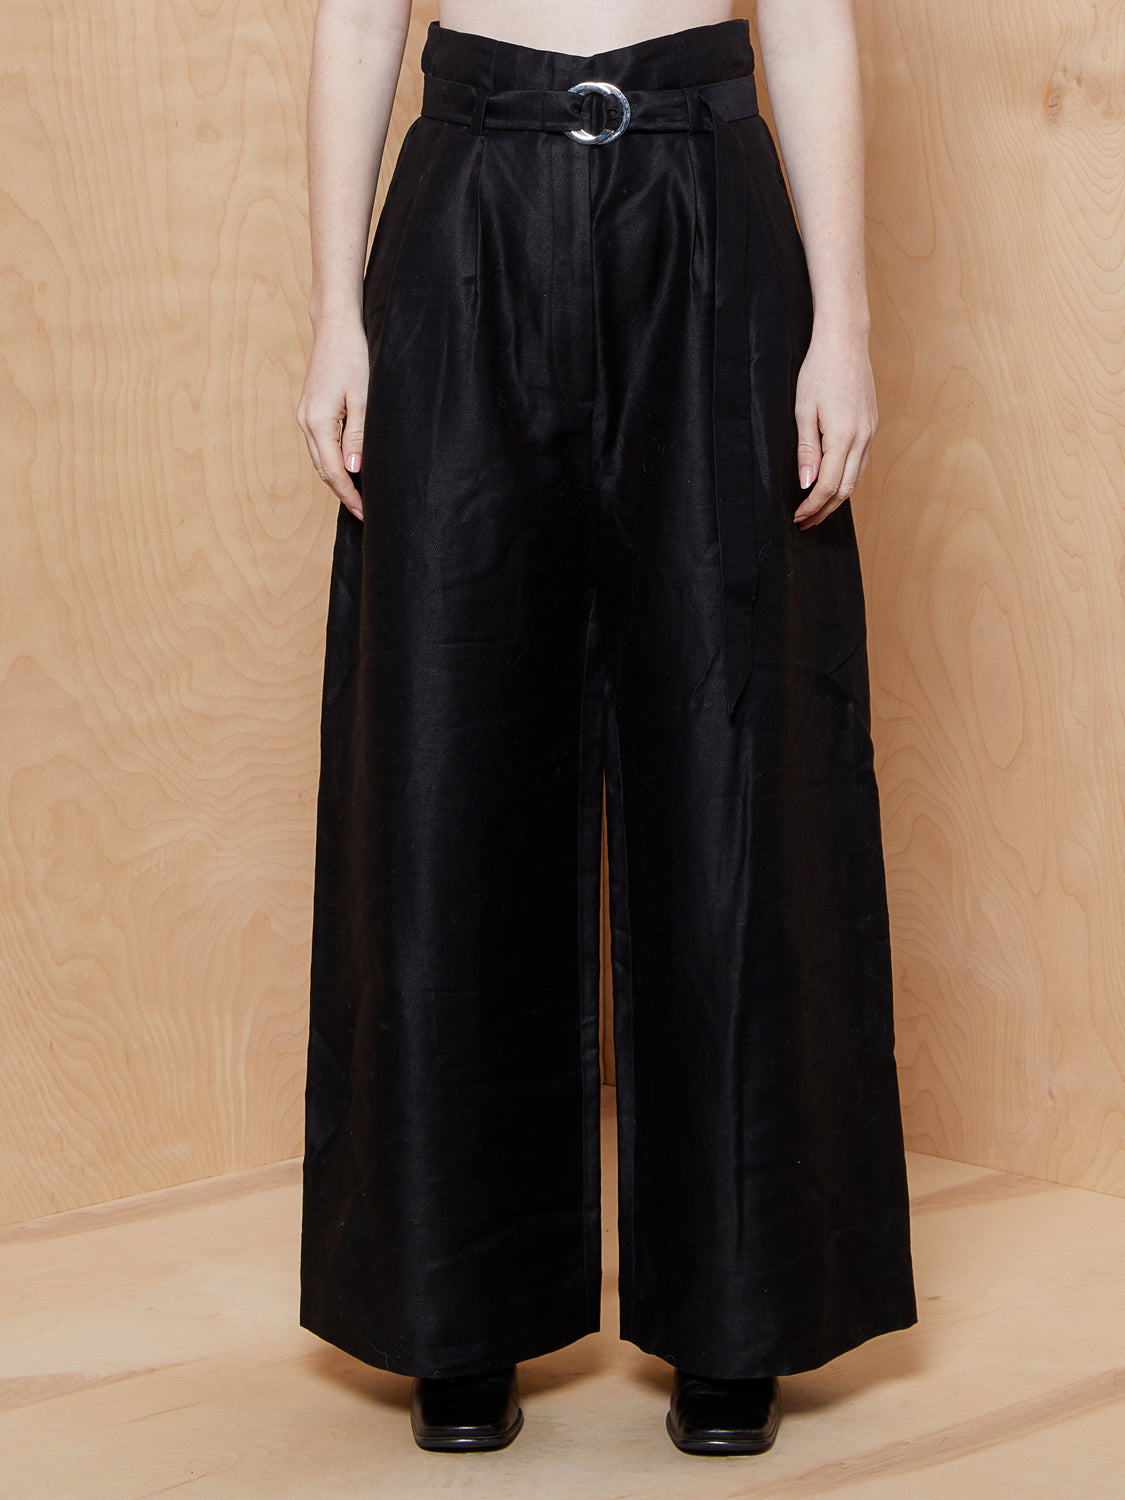 & Other Stories Navy High Waisted Trousers